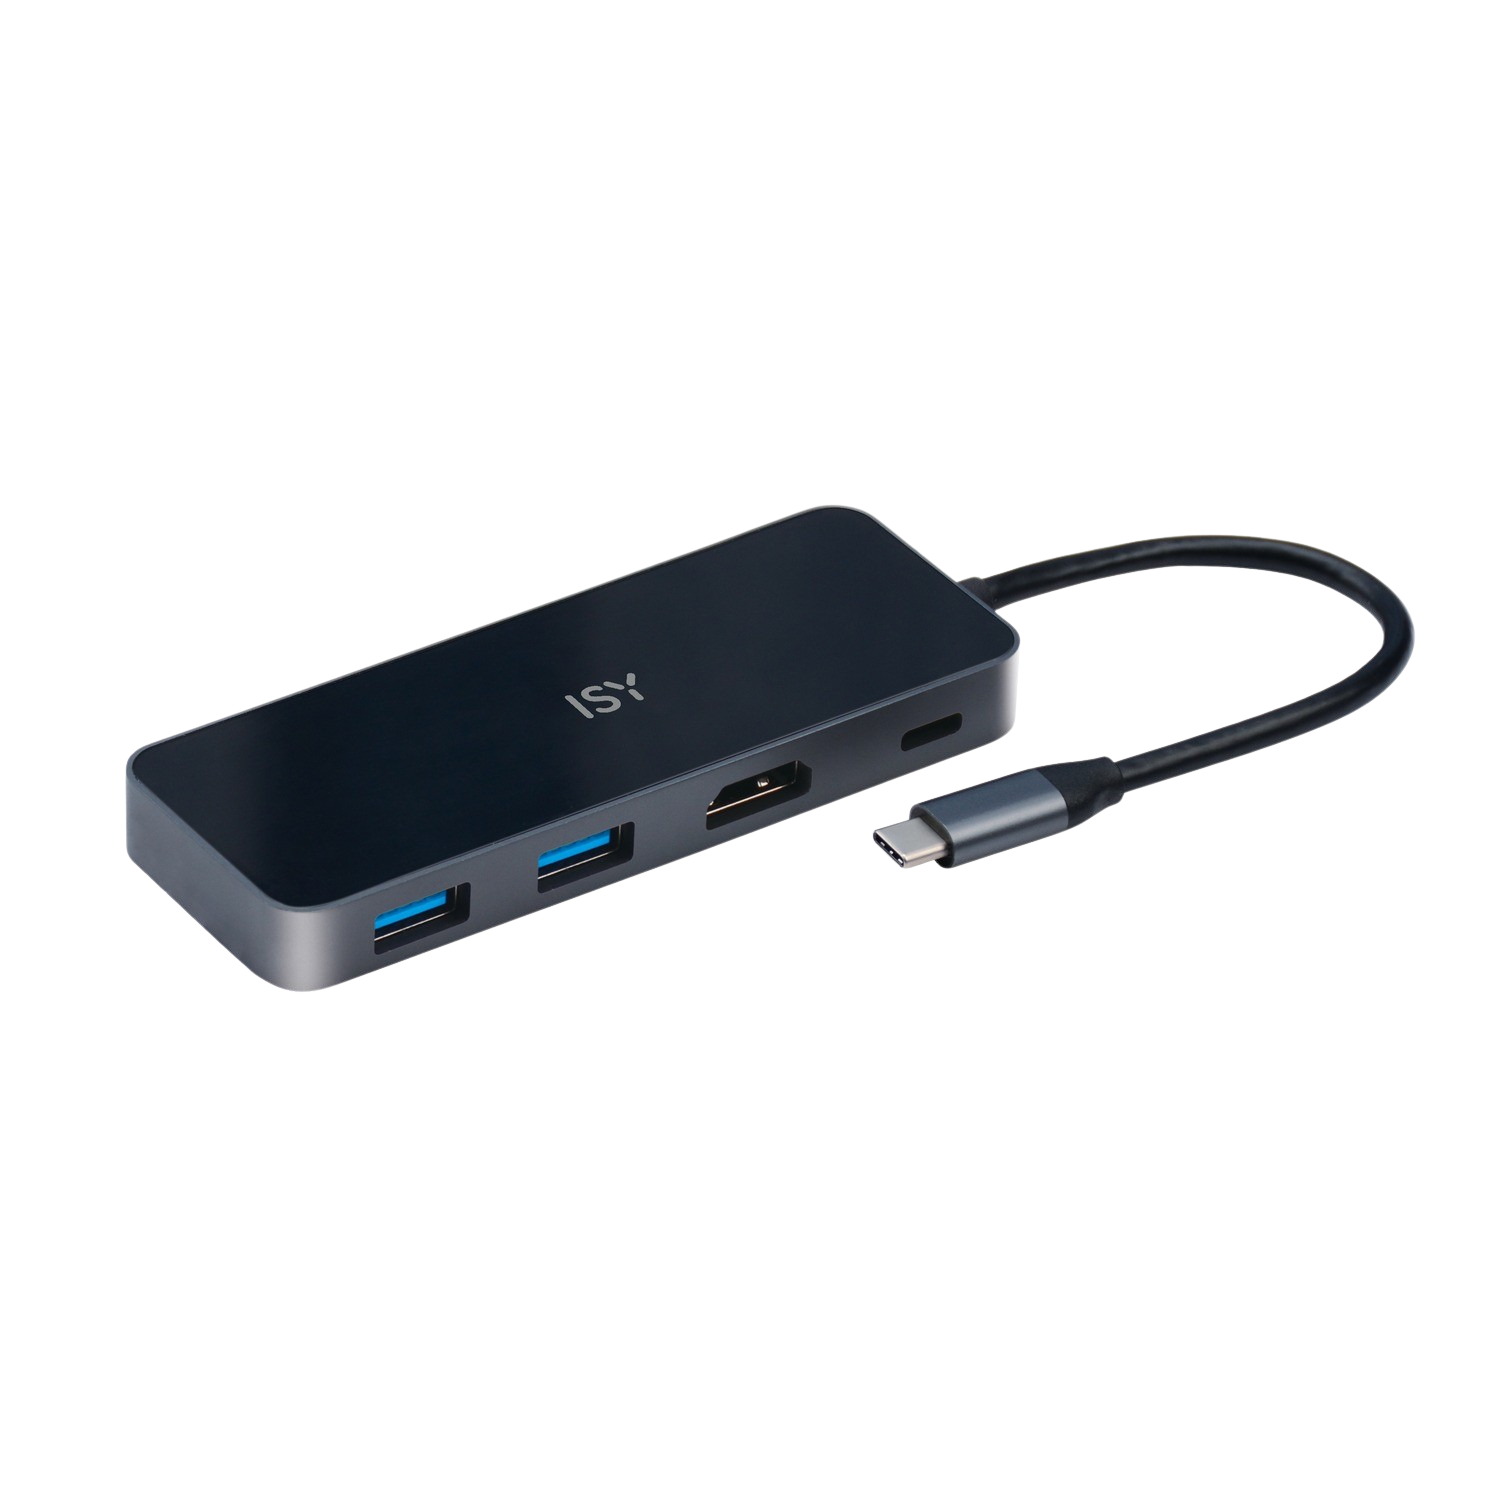 ISY Iad 1028-1 4-in-1 Multiport Adapter Usb-c/usb-a/hdmi Power Delivery